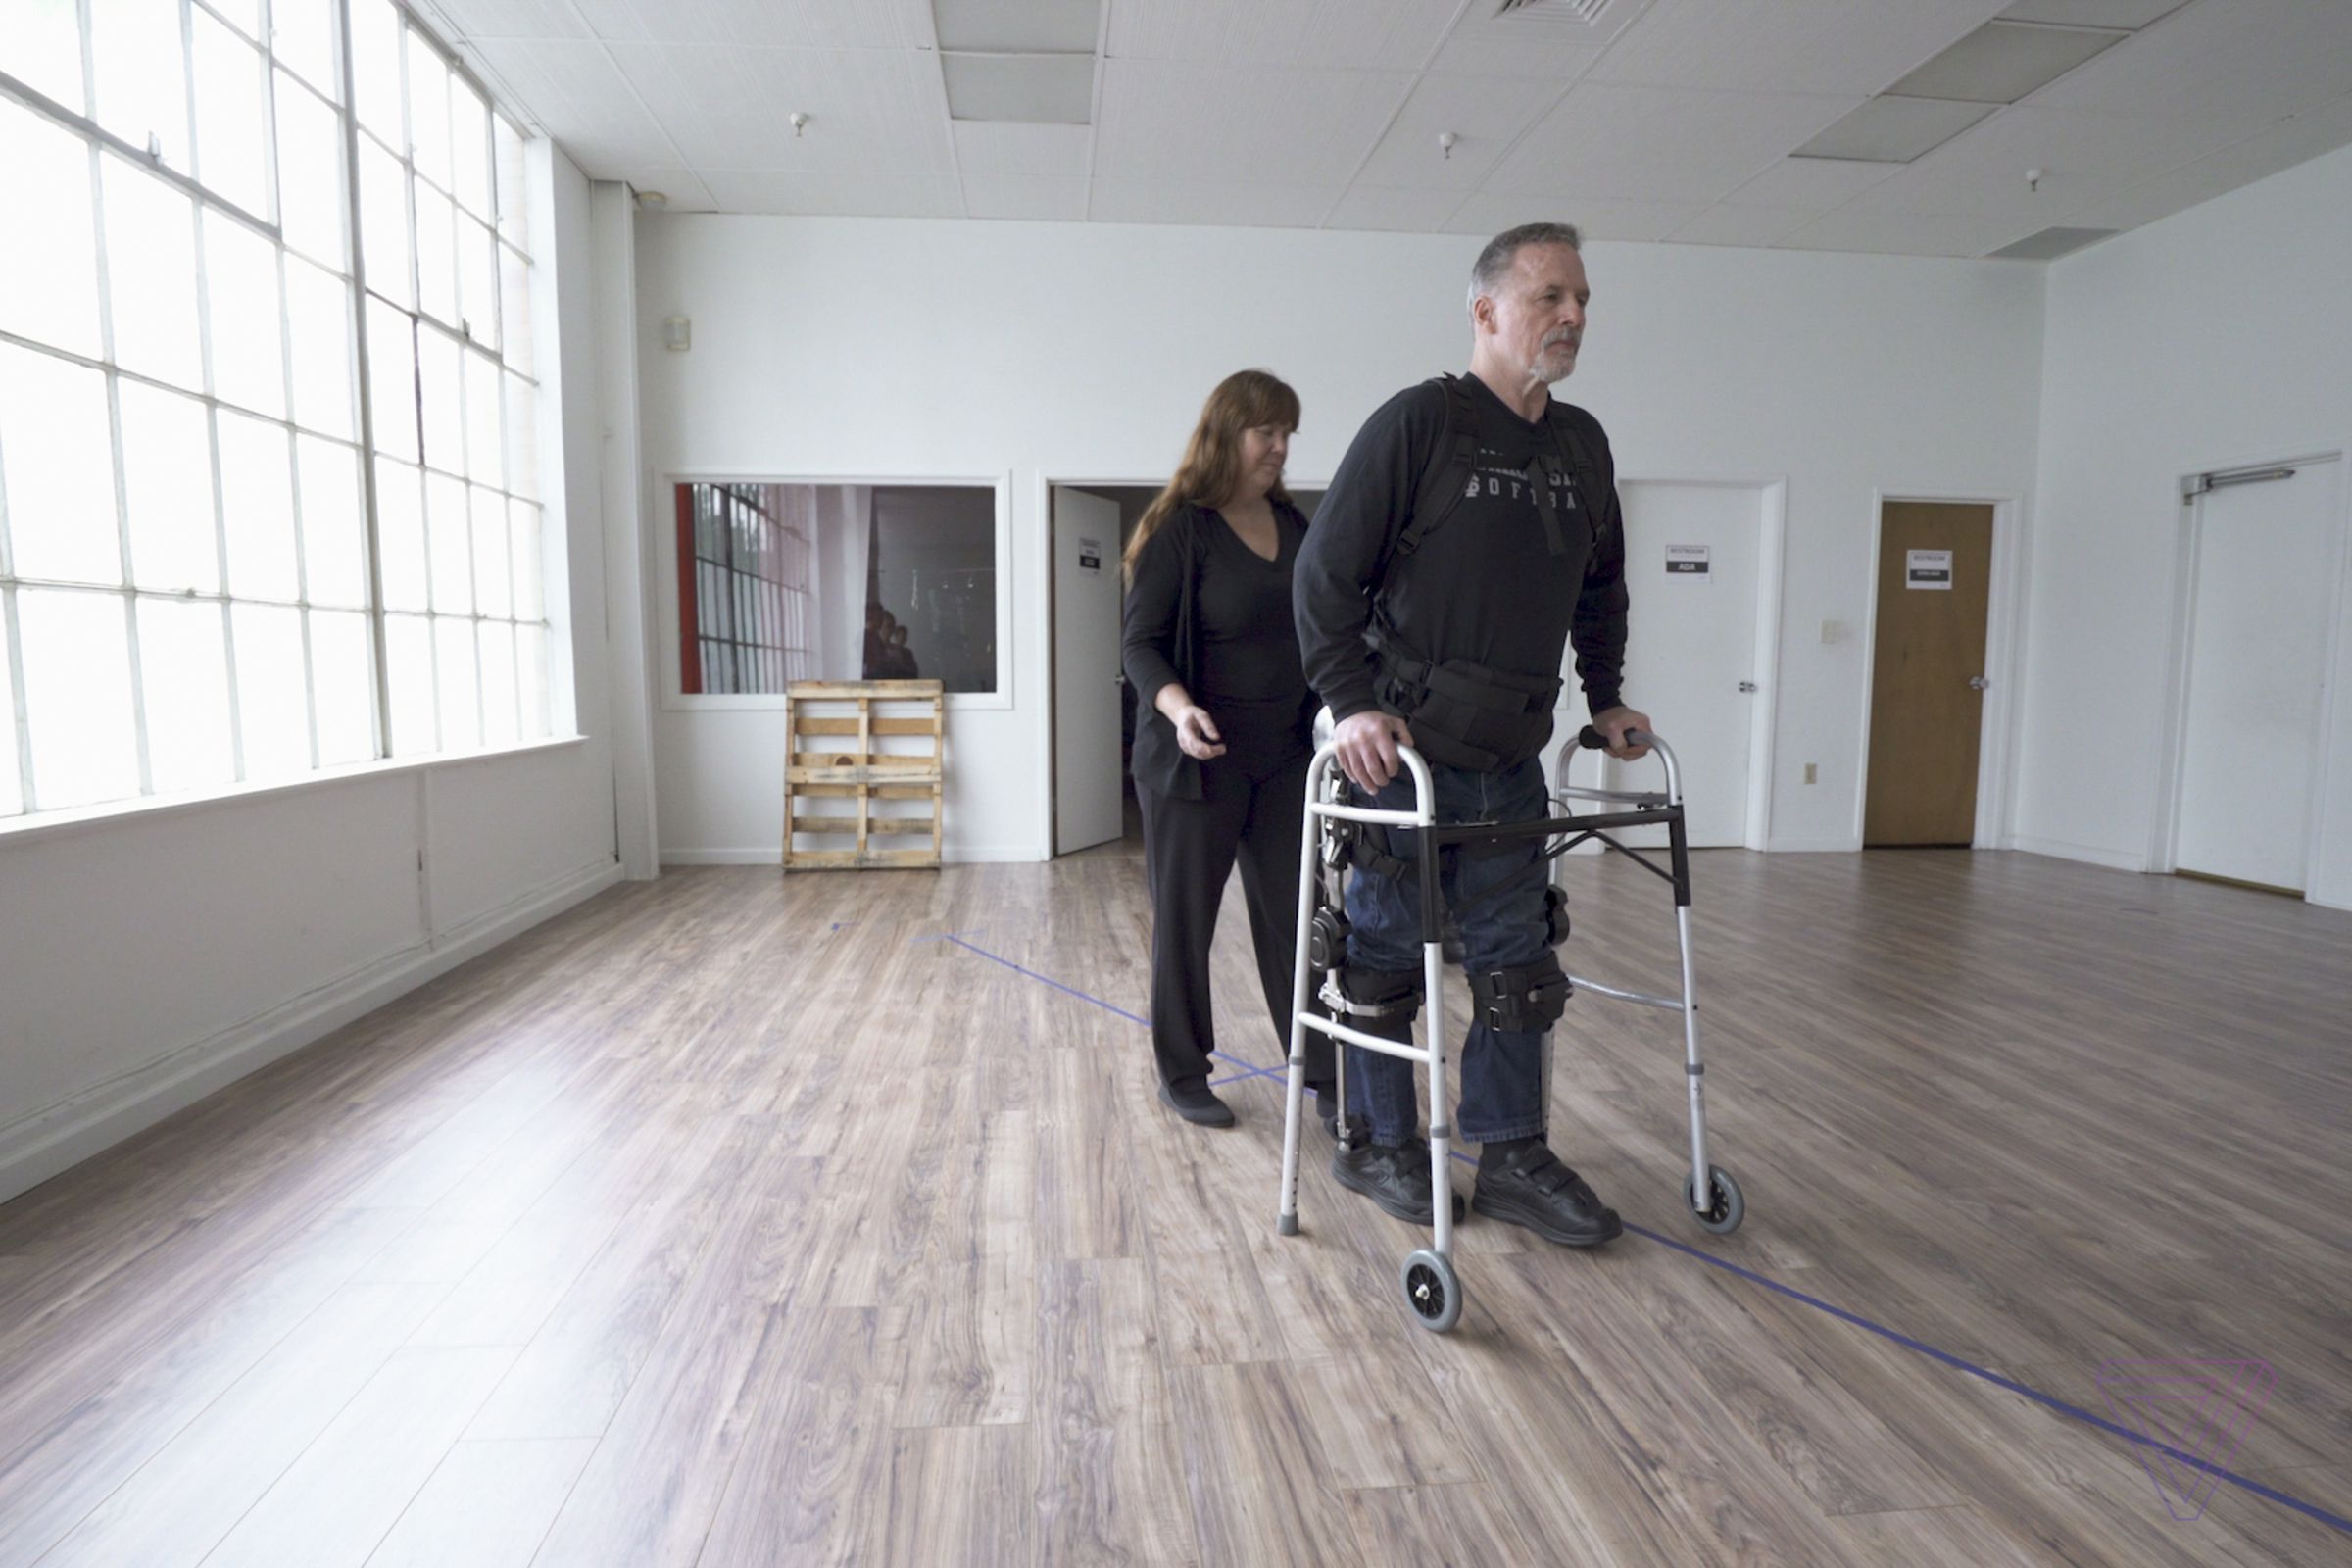 Jim Burnett was paralyzed 14 years ago in a motorcycle accident. He now walks for exercise on occasion, thanks to SuitX’s motorized exoskeleton.